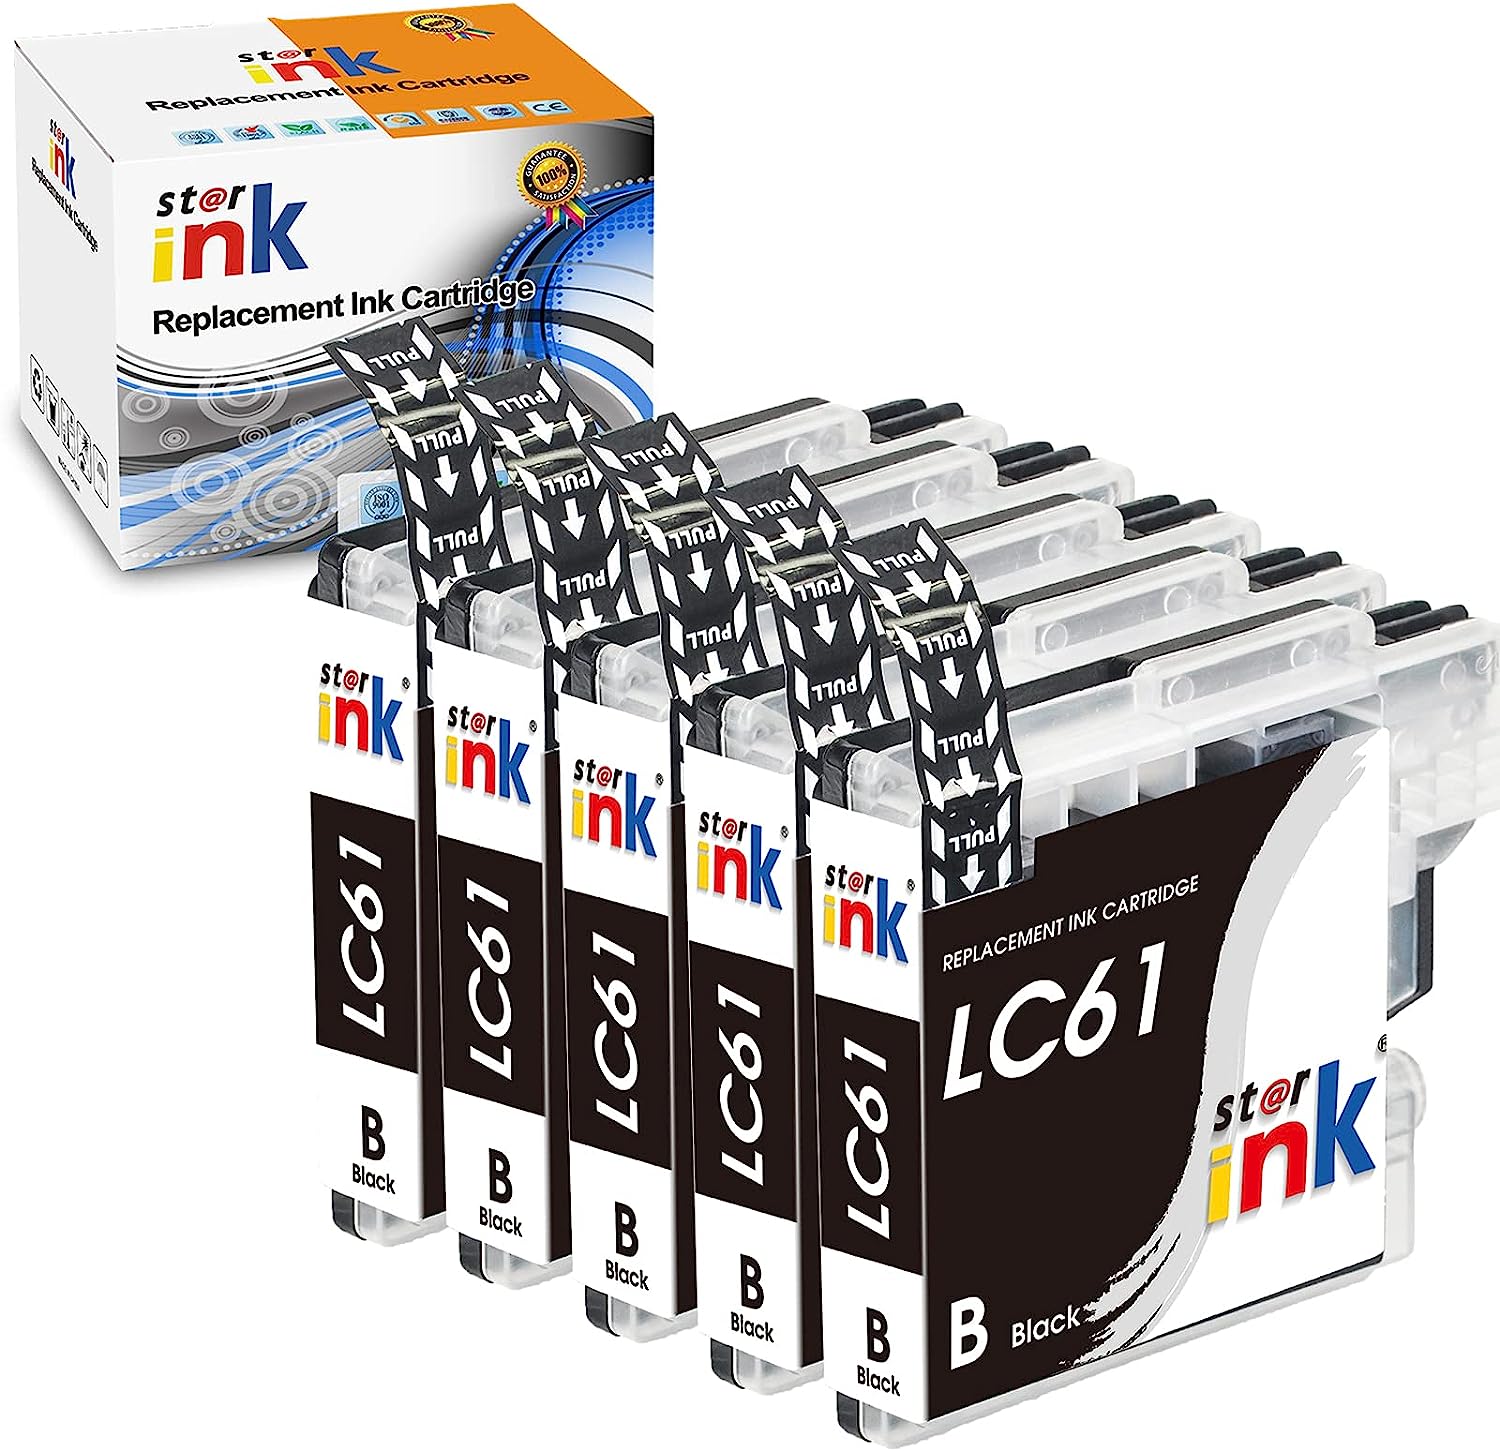 Compatible Brother LC61 XL Ink Cartridge (Black) 5 Packs - Linford Office:Printer Ink & Toner Cartridge